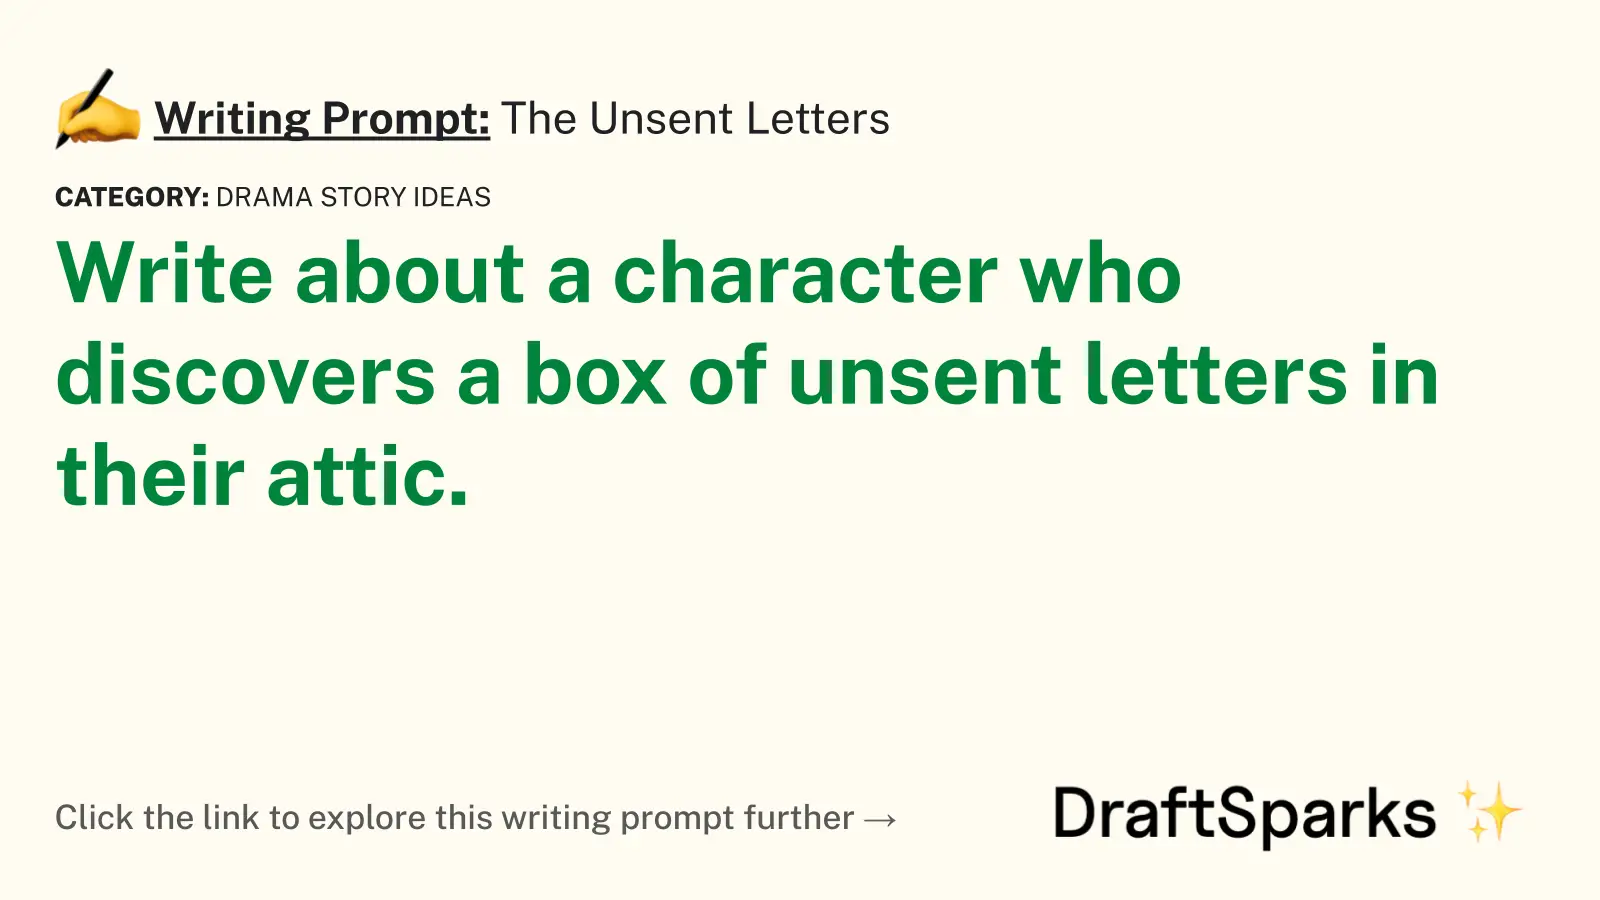 The Unsent Letters